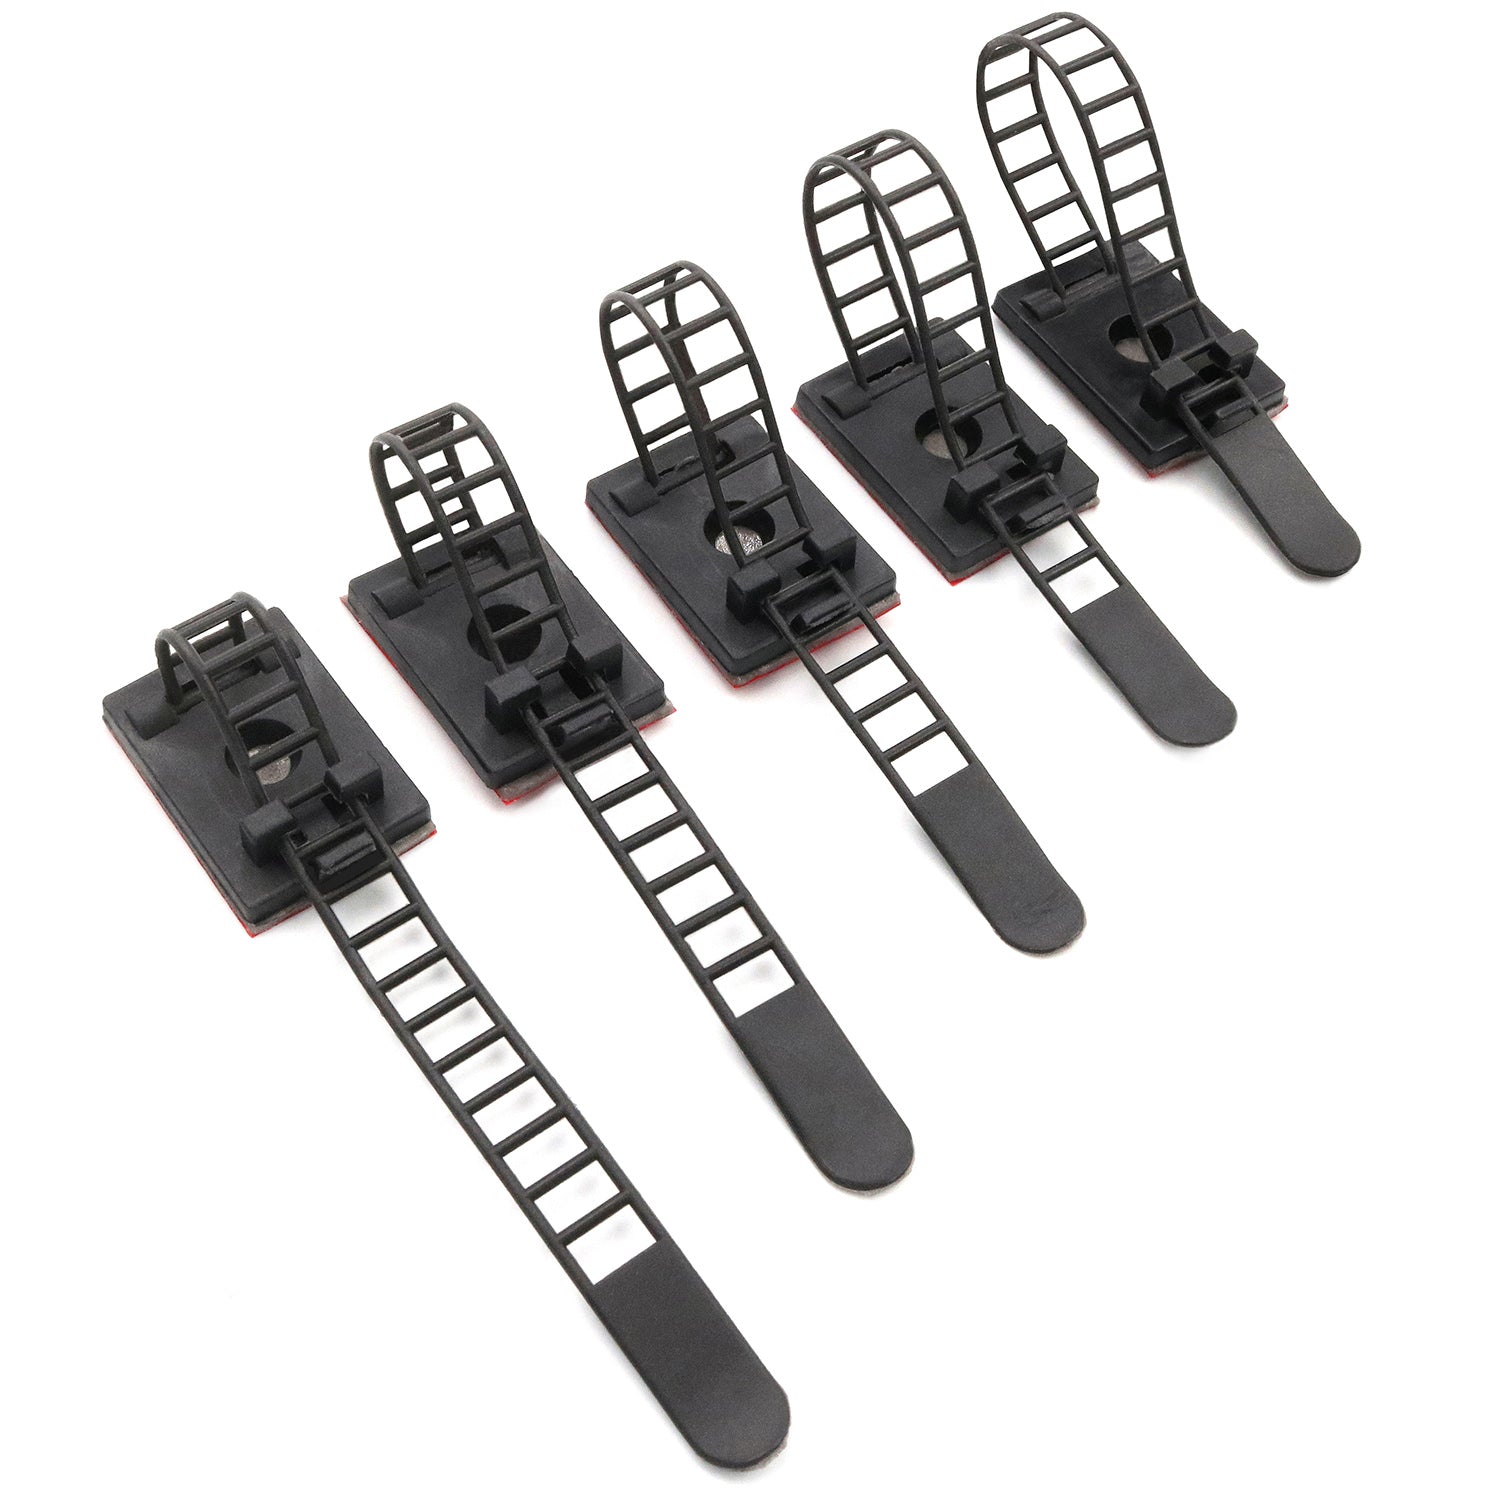 Medium Adjustable Cable Clips (25mm x 18mm) - 60 Pack Bundled with 10 Bonus Reusable Cable Ties